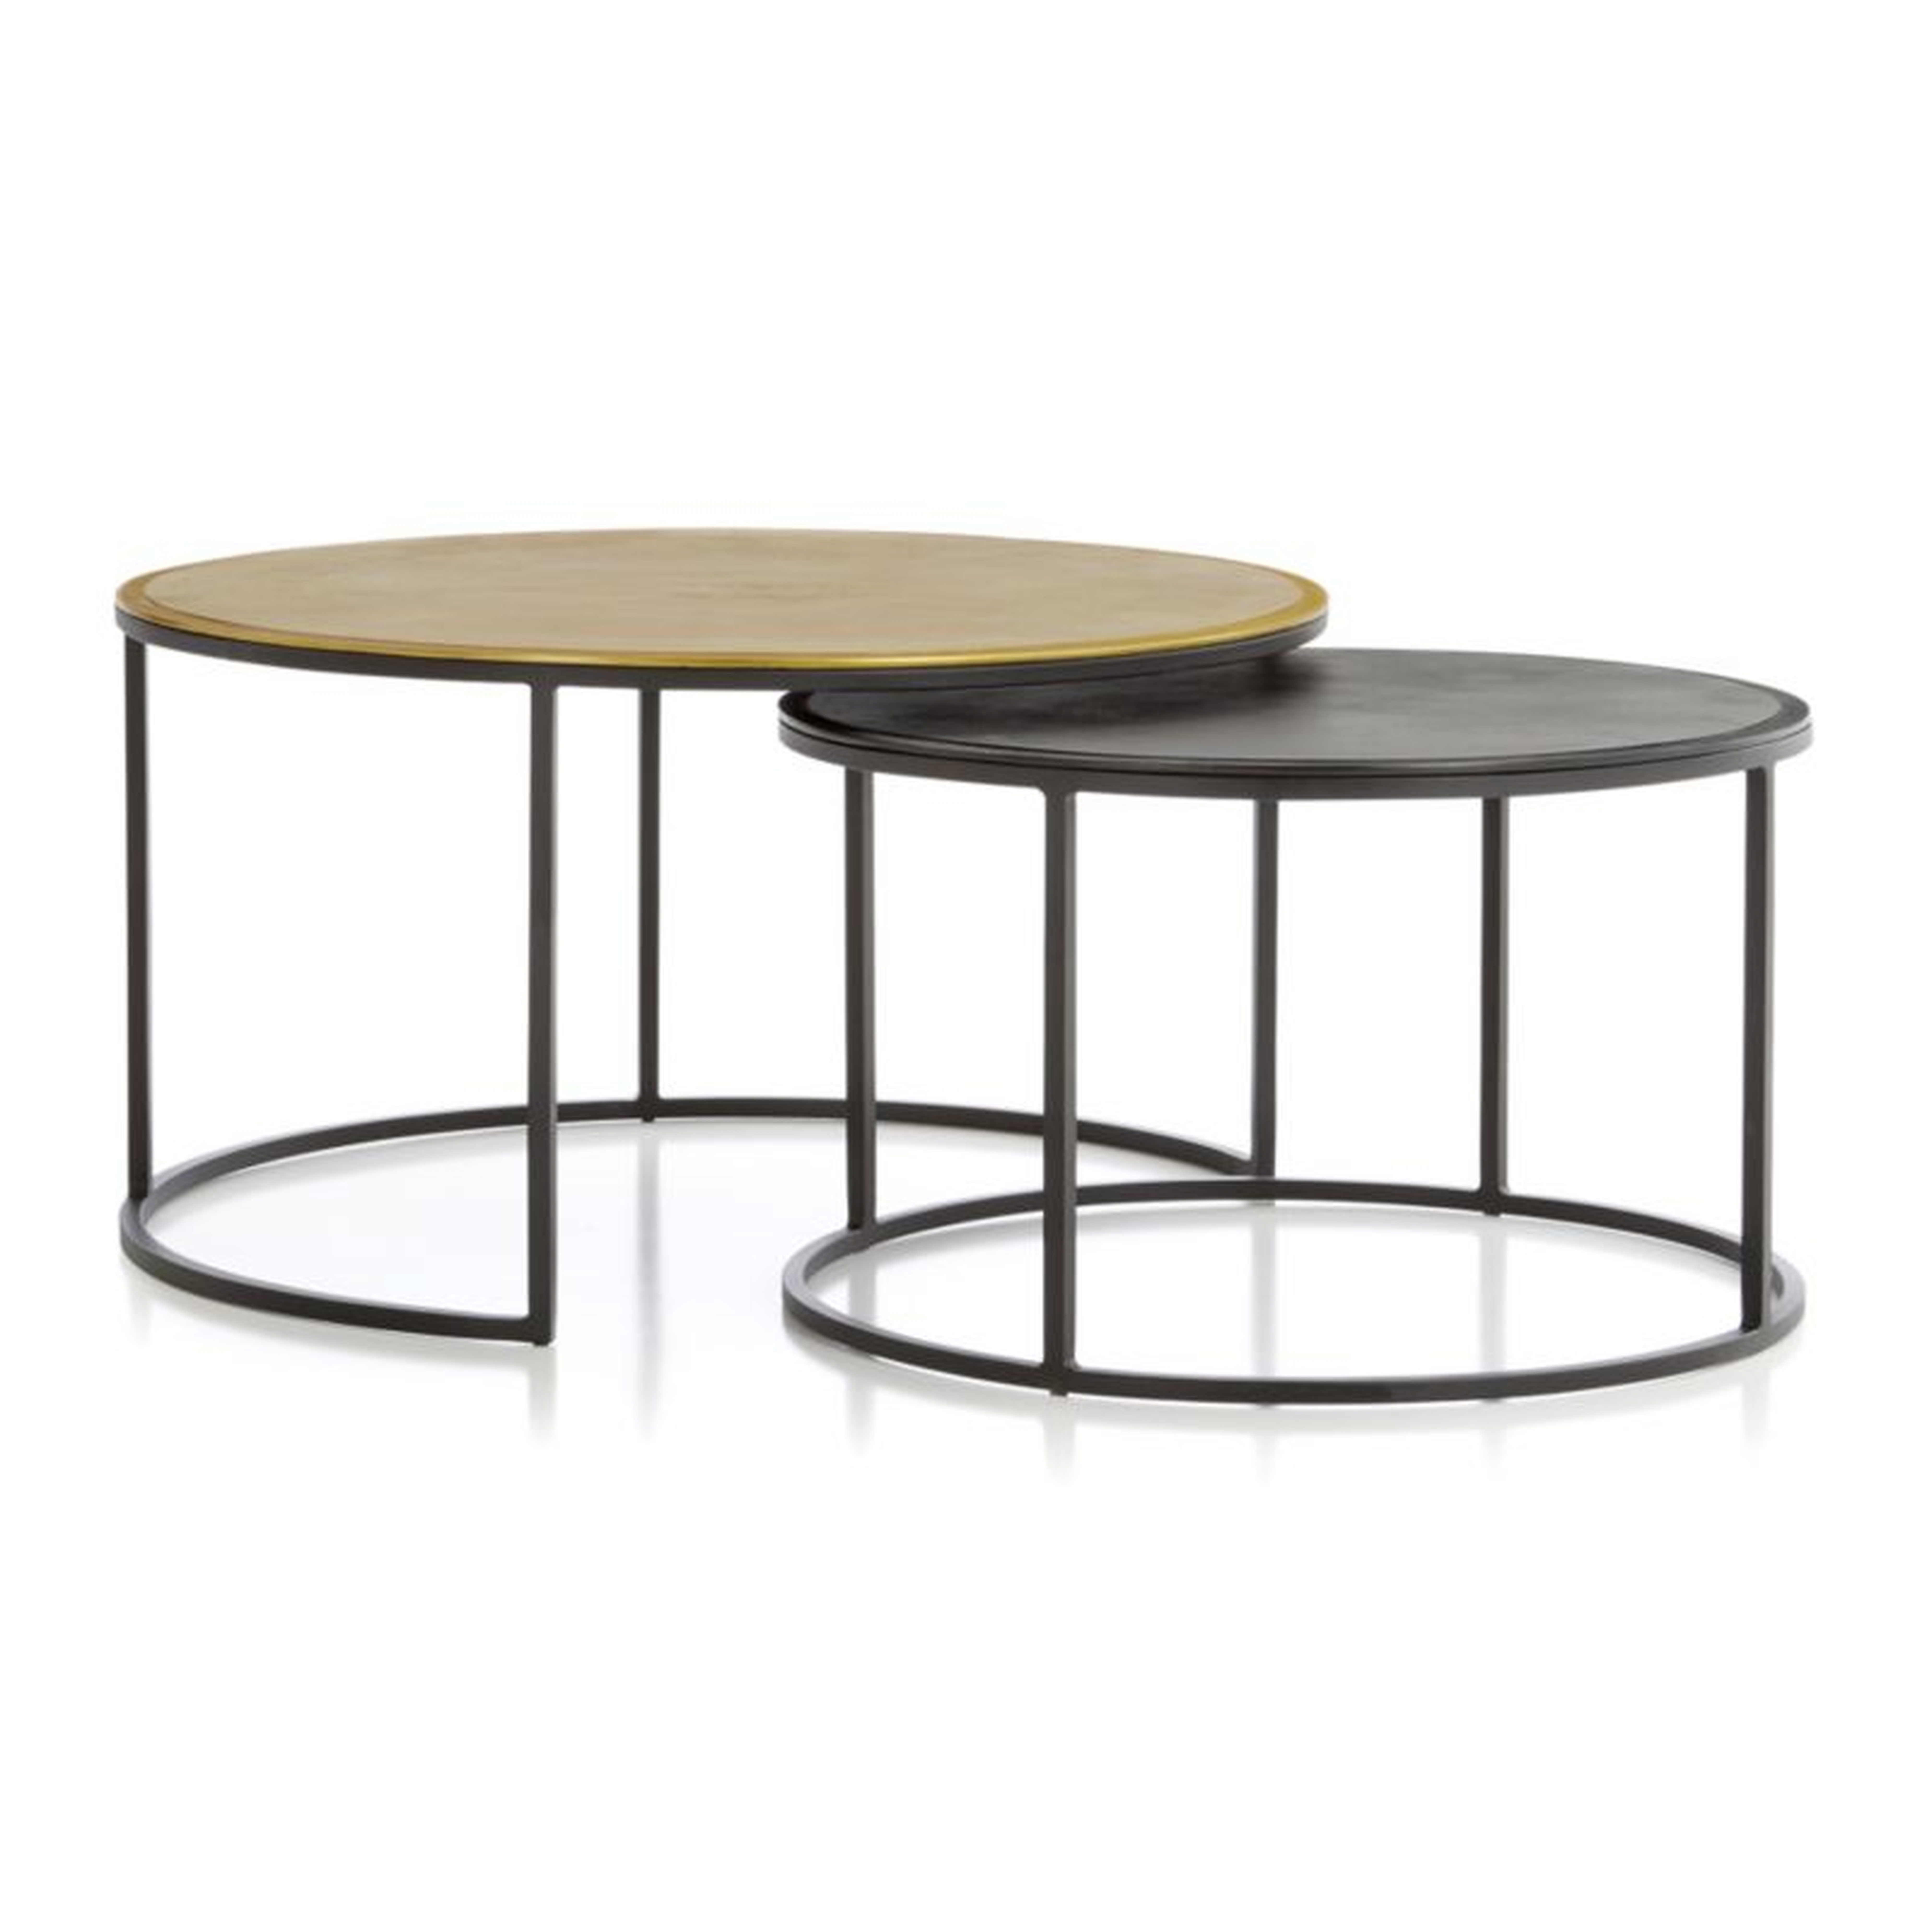 Knurl Nesting Coffee Tables Set of Two - Crate and Barrel